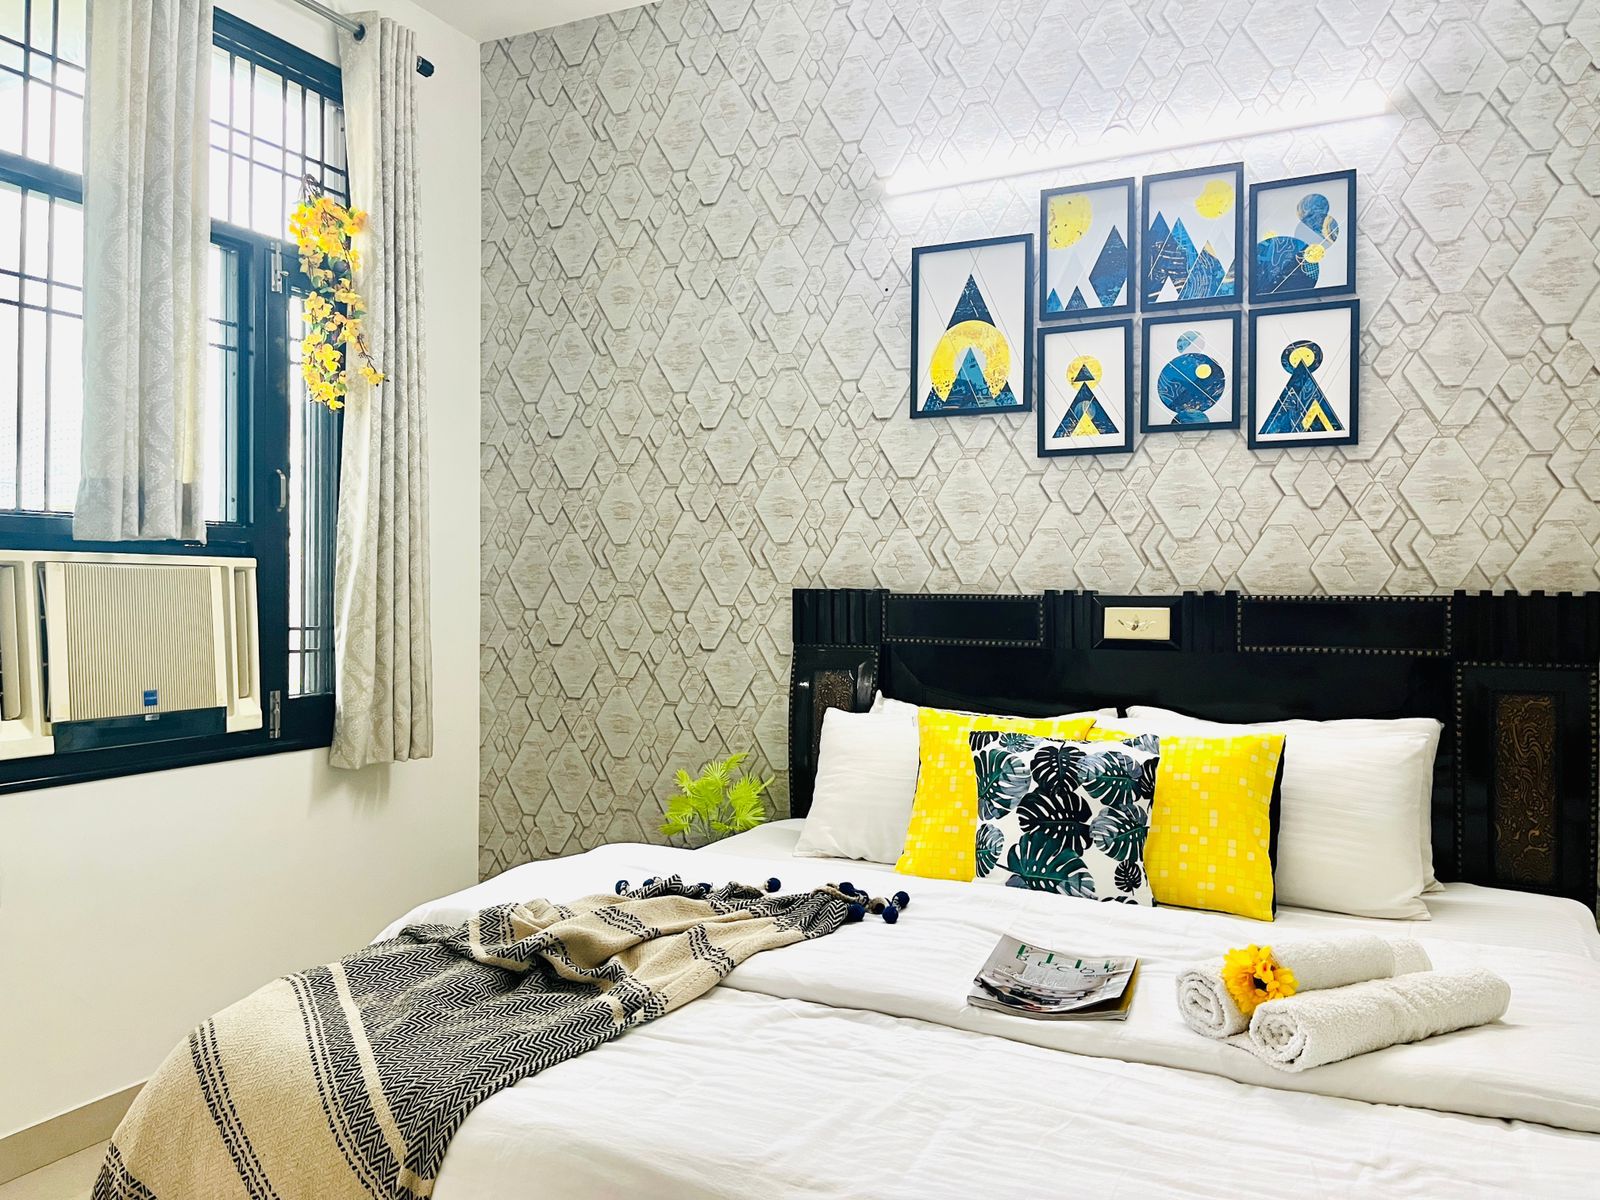 Service Apartments in South Delhi for your next stay